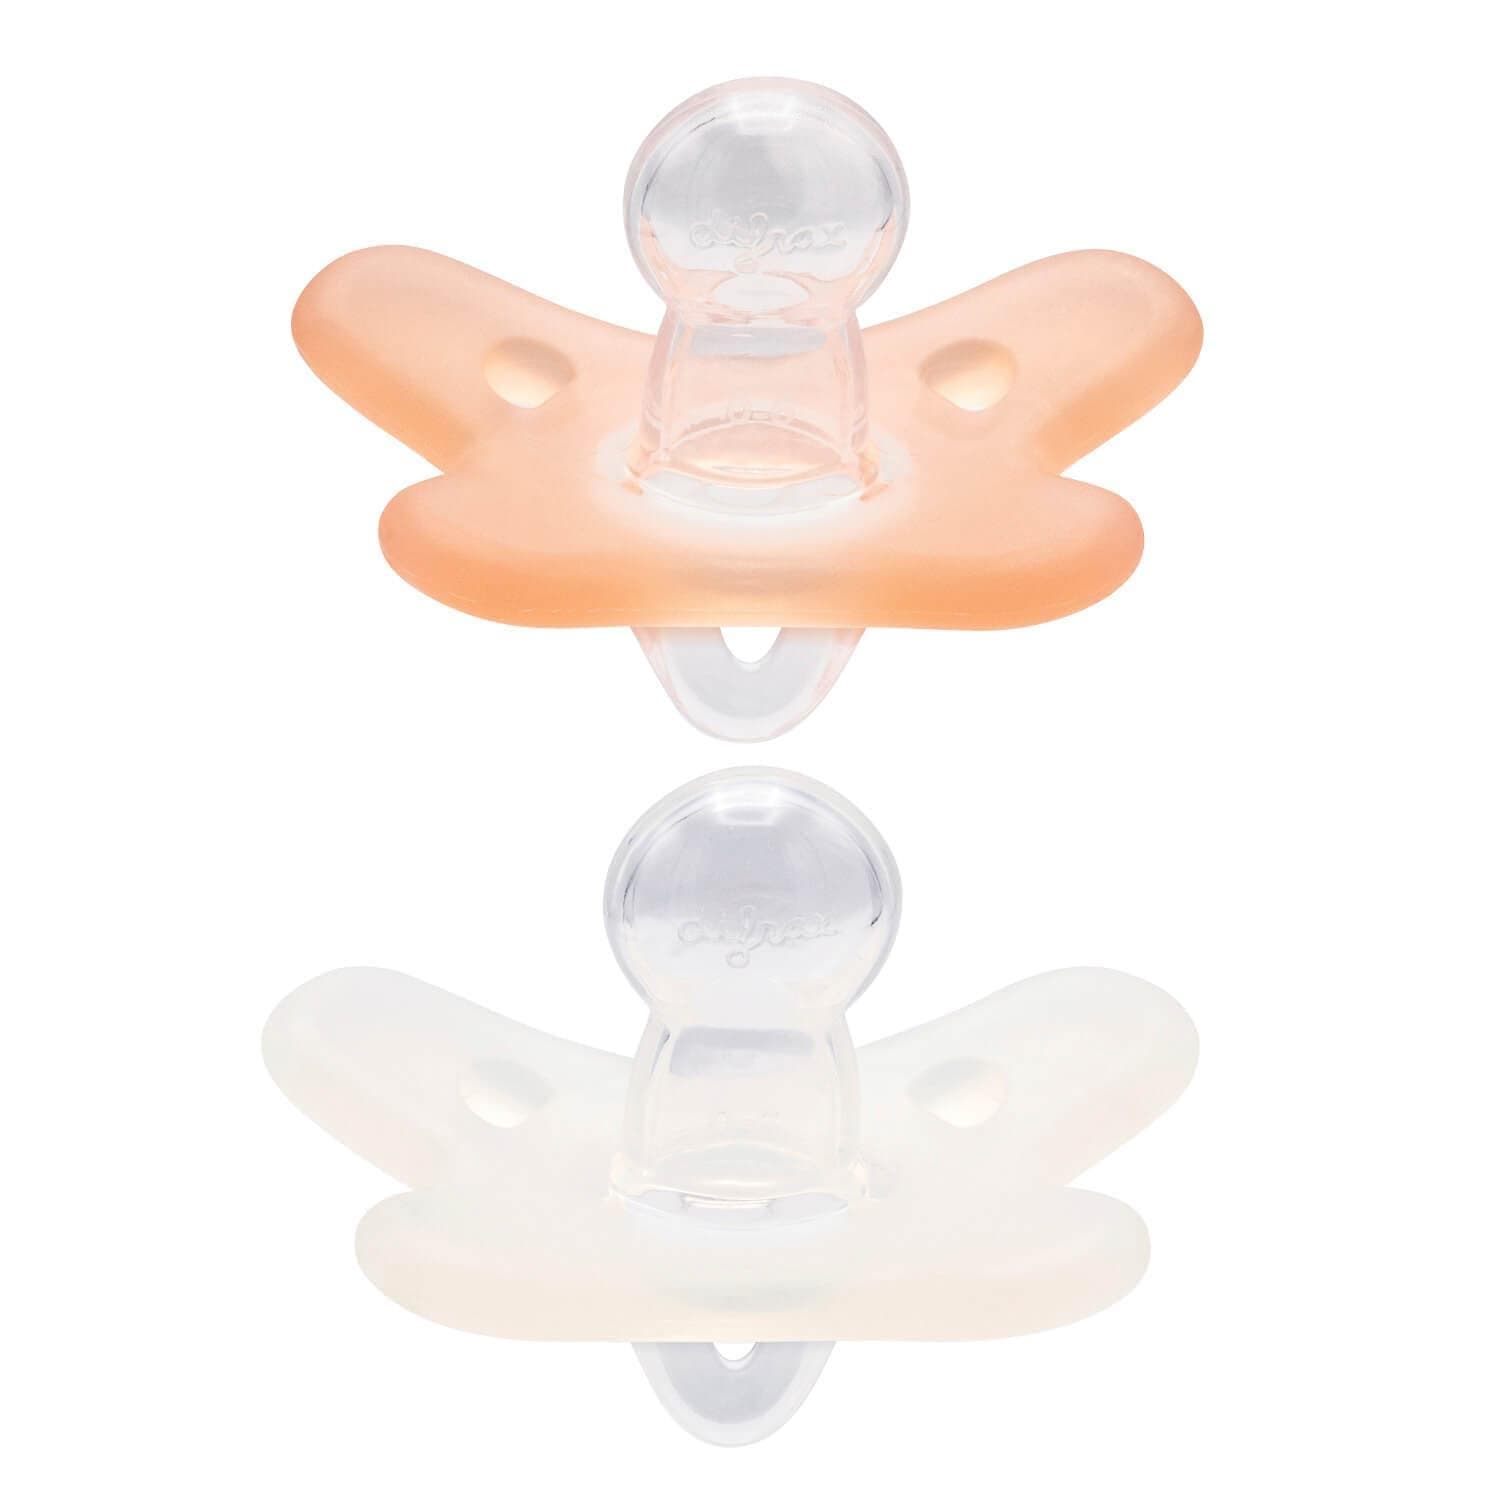 Silicone pacifier 0-6 months - 2 pack